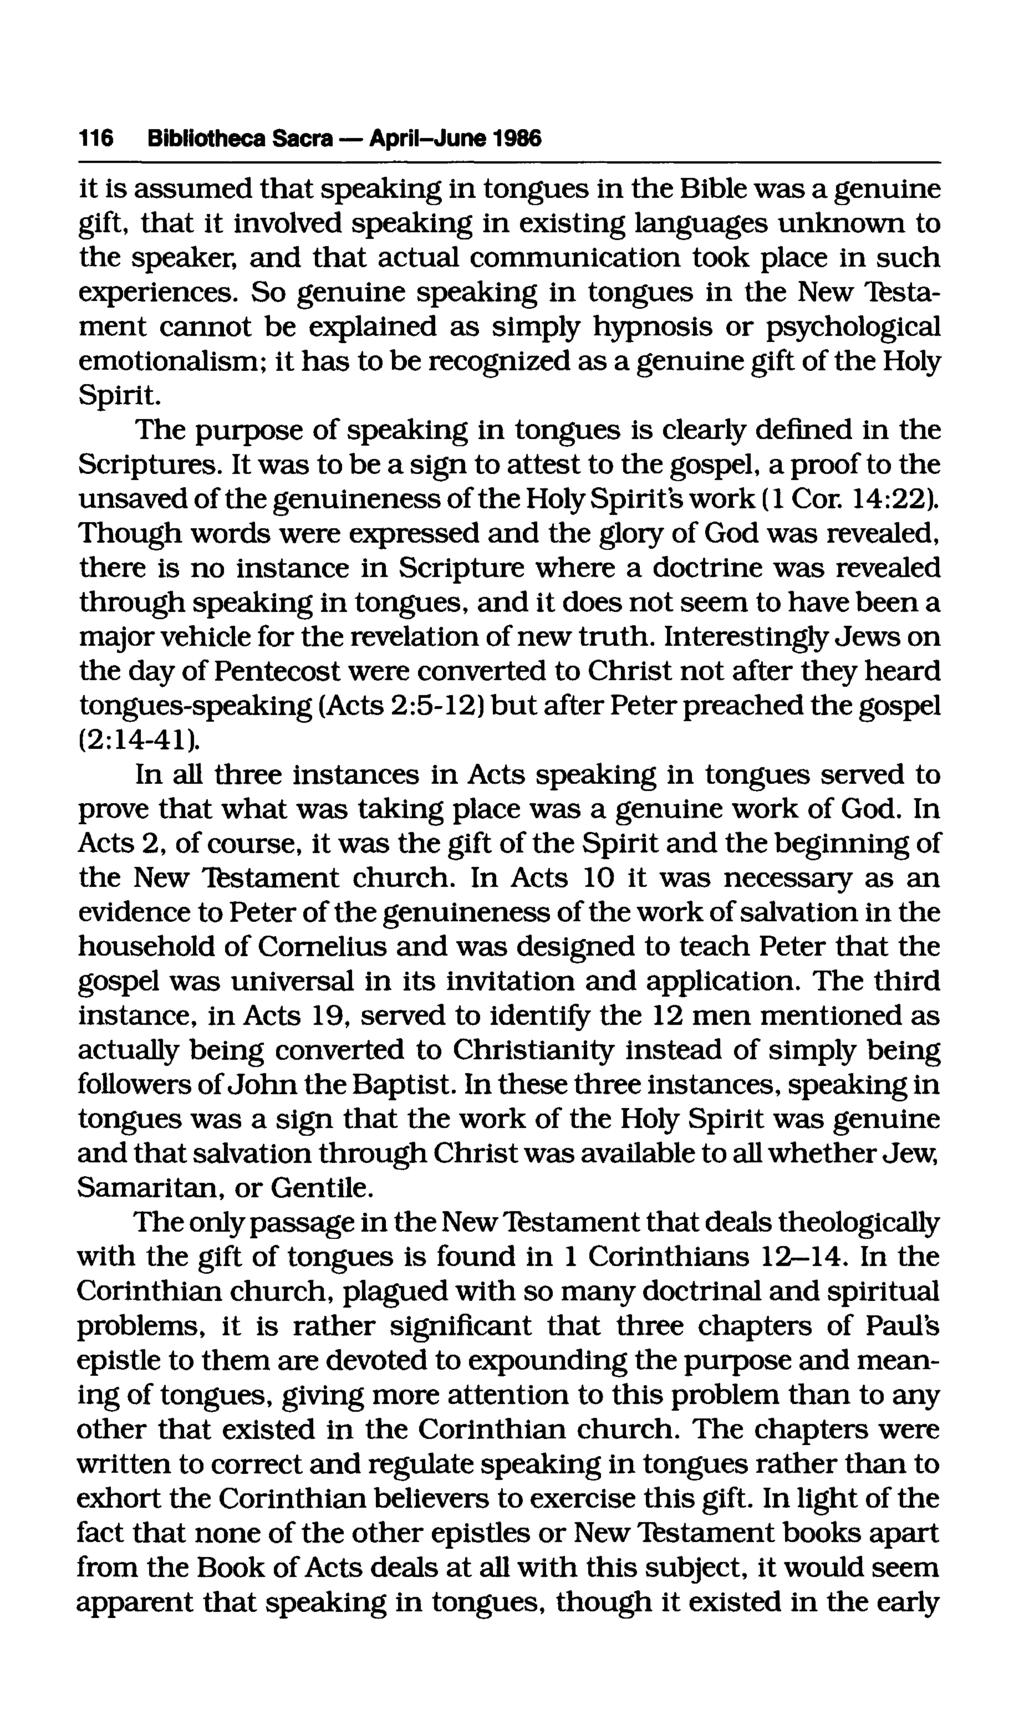 116 Bibliotheca Sacra April-June 1986 it is assumed that speaking in tongues in the Bible was a genuine gift, that it involved speaking in existing languages unknown to the speaker, and that actual